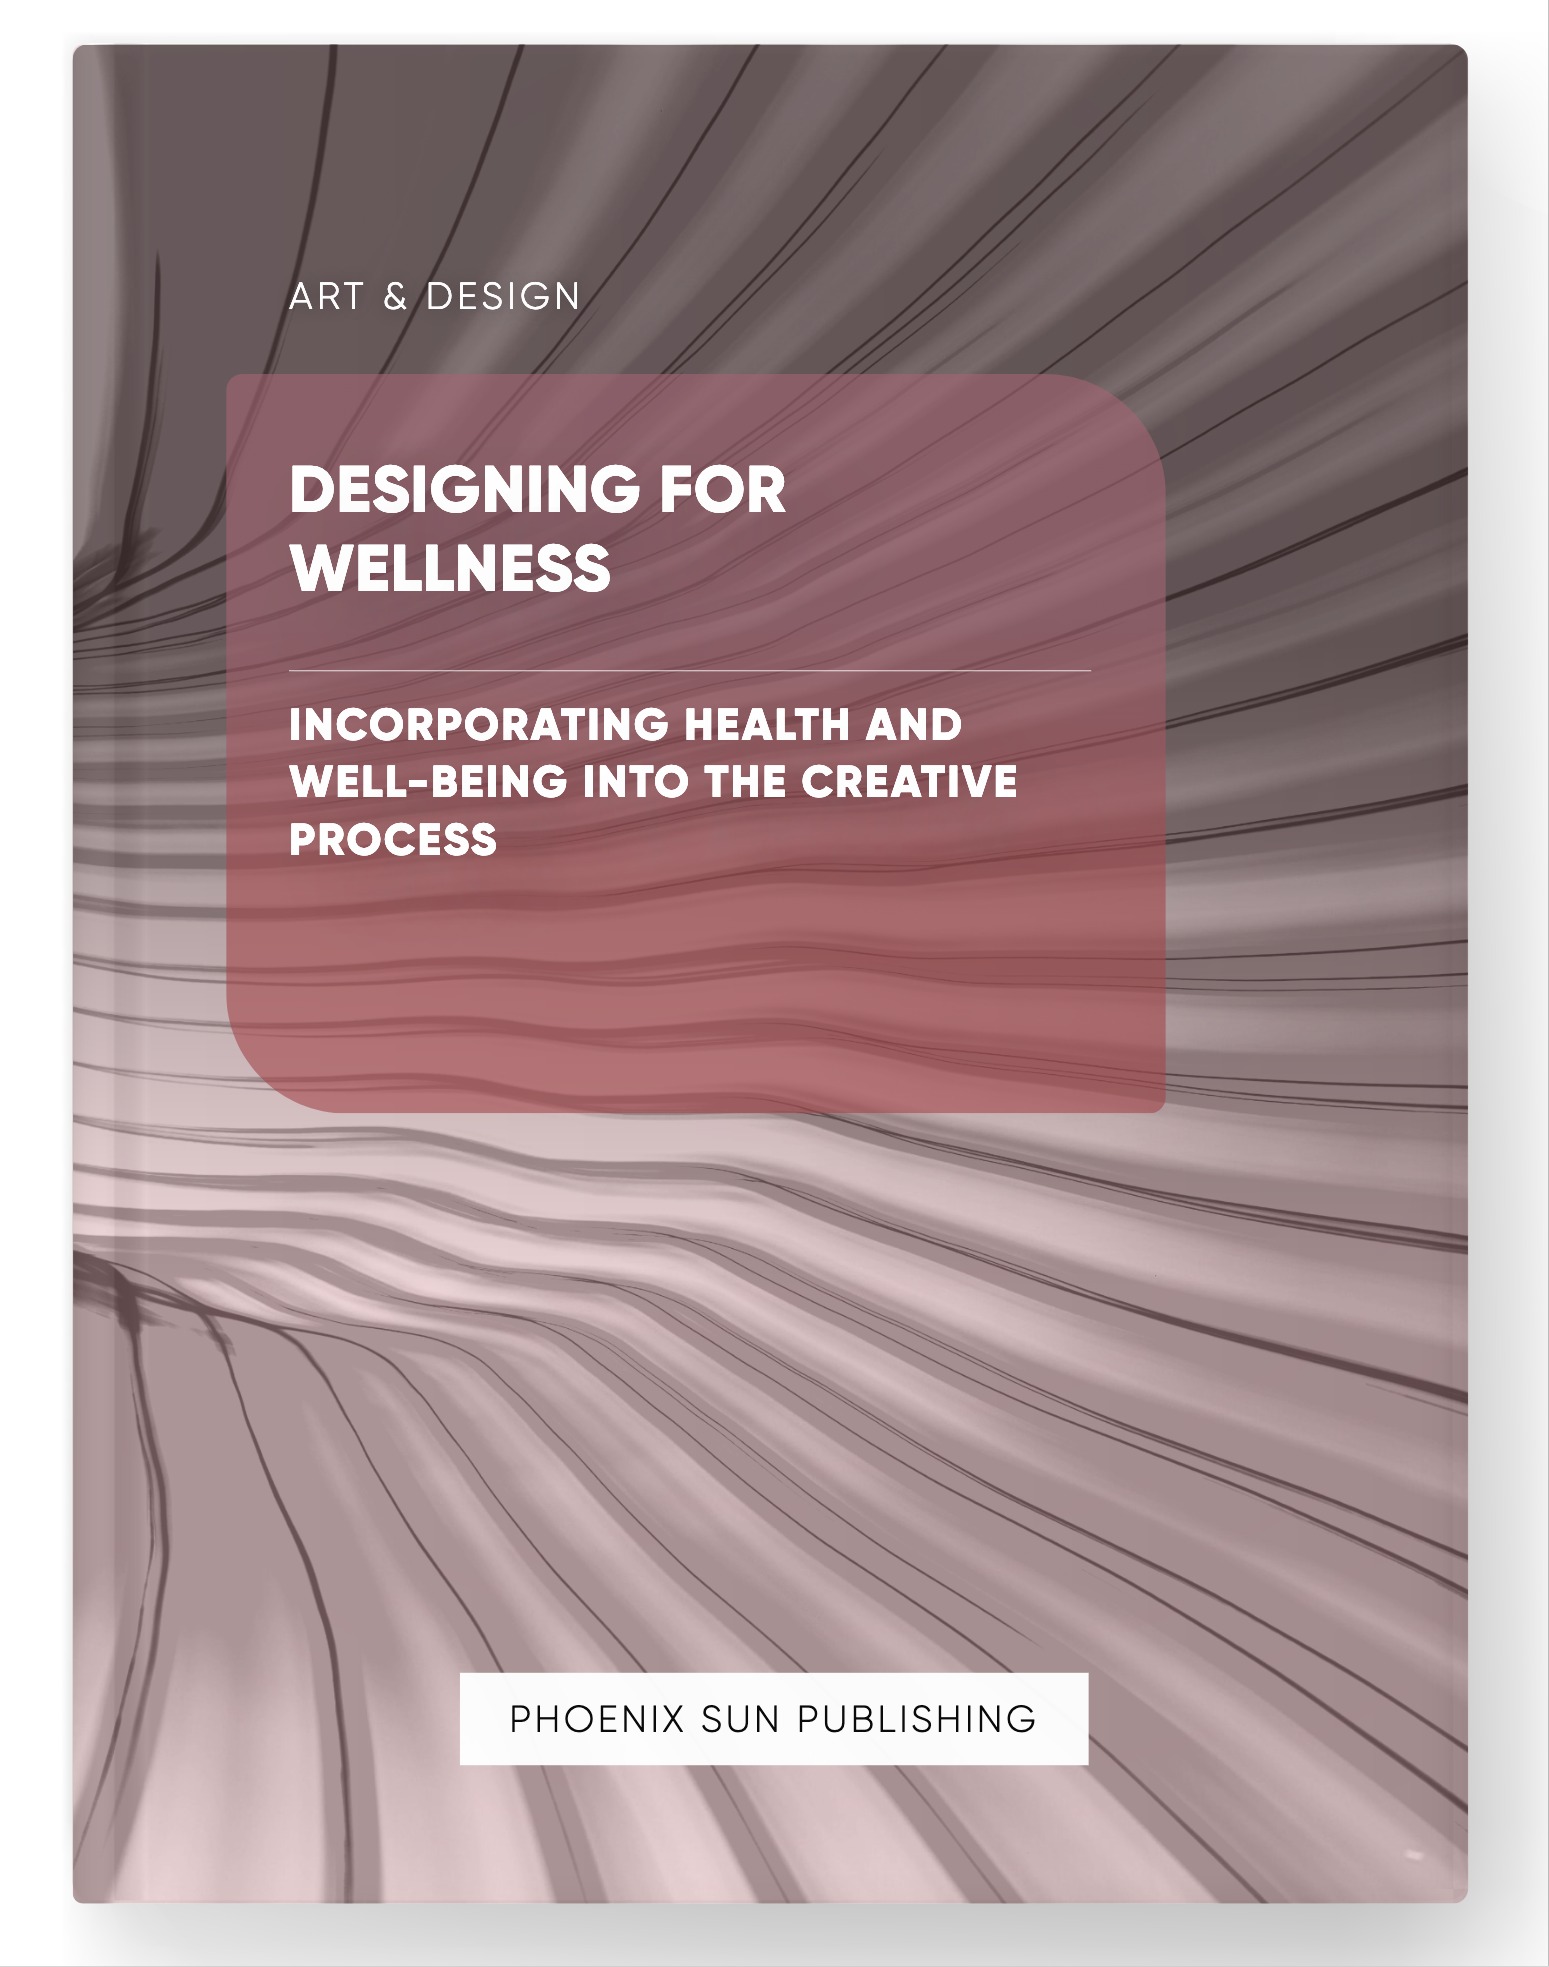 Designing for Wellness – Incorporating Health and Well-Being into the Creative Process